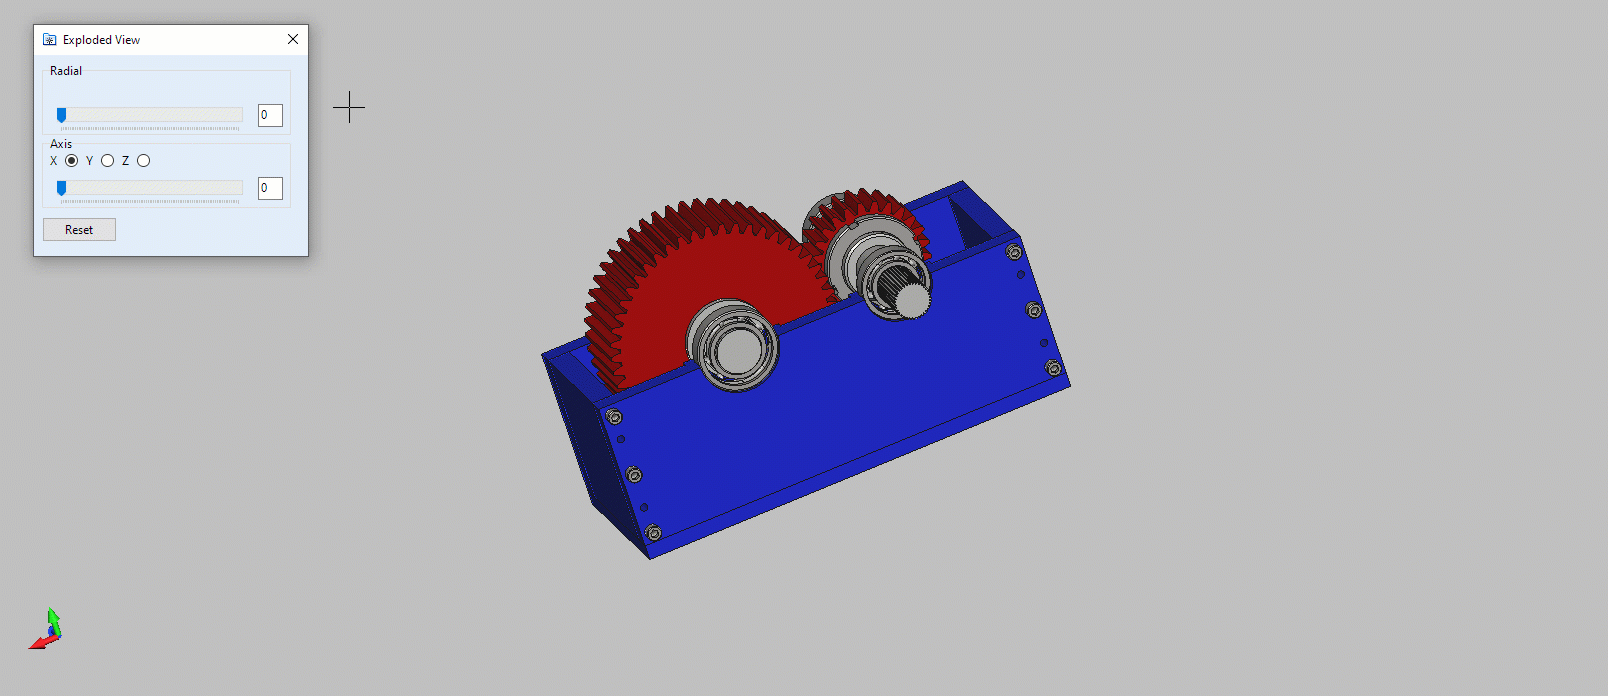 Exploded view of a 3D model in ABViewer